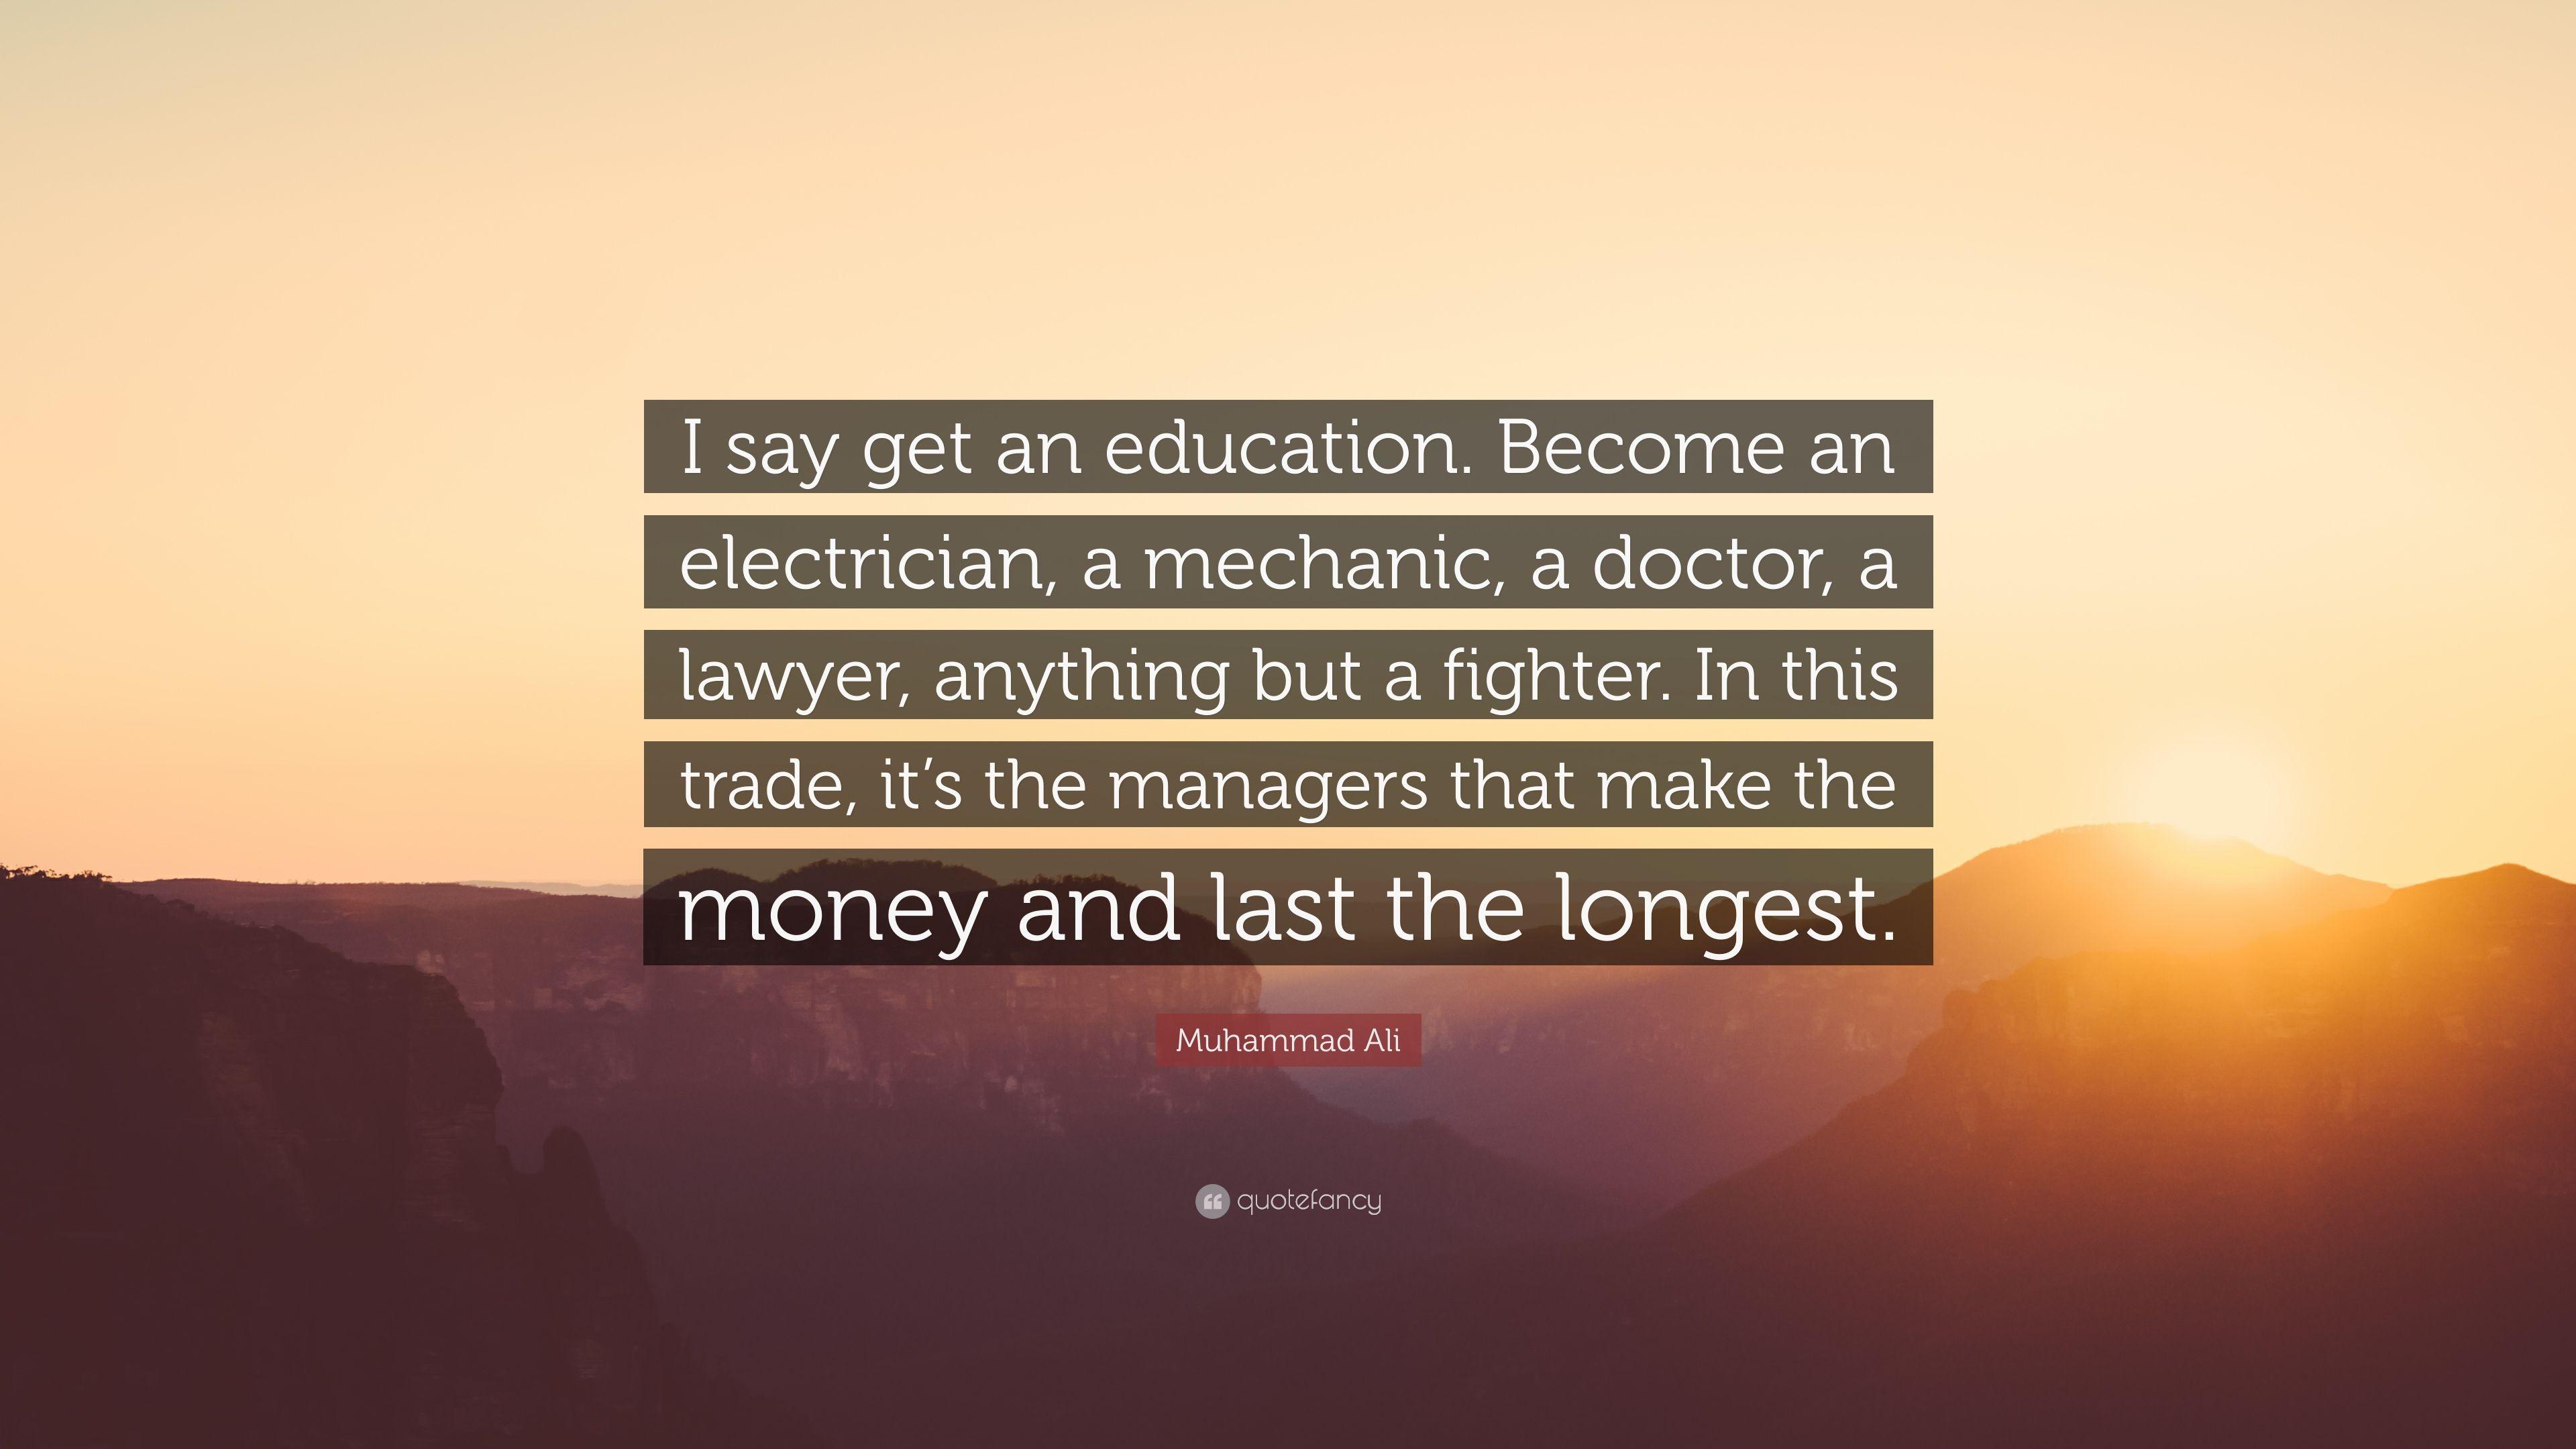 Muhammad Ali Quote: “I say get an education. Become an electrician